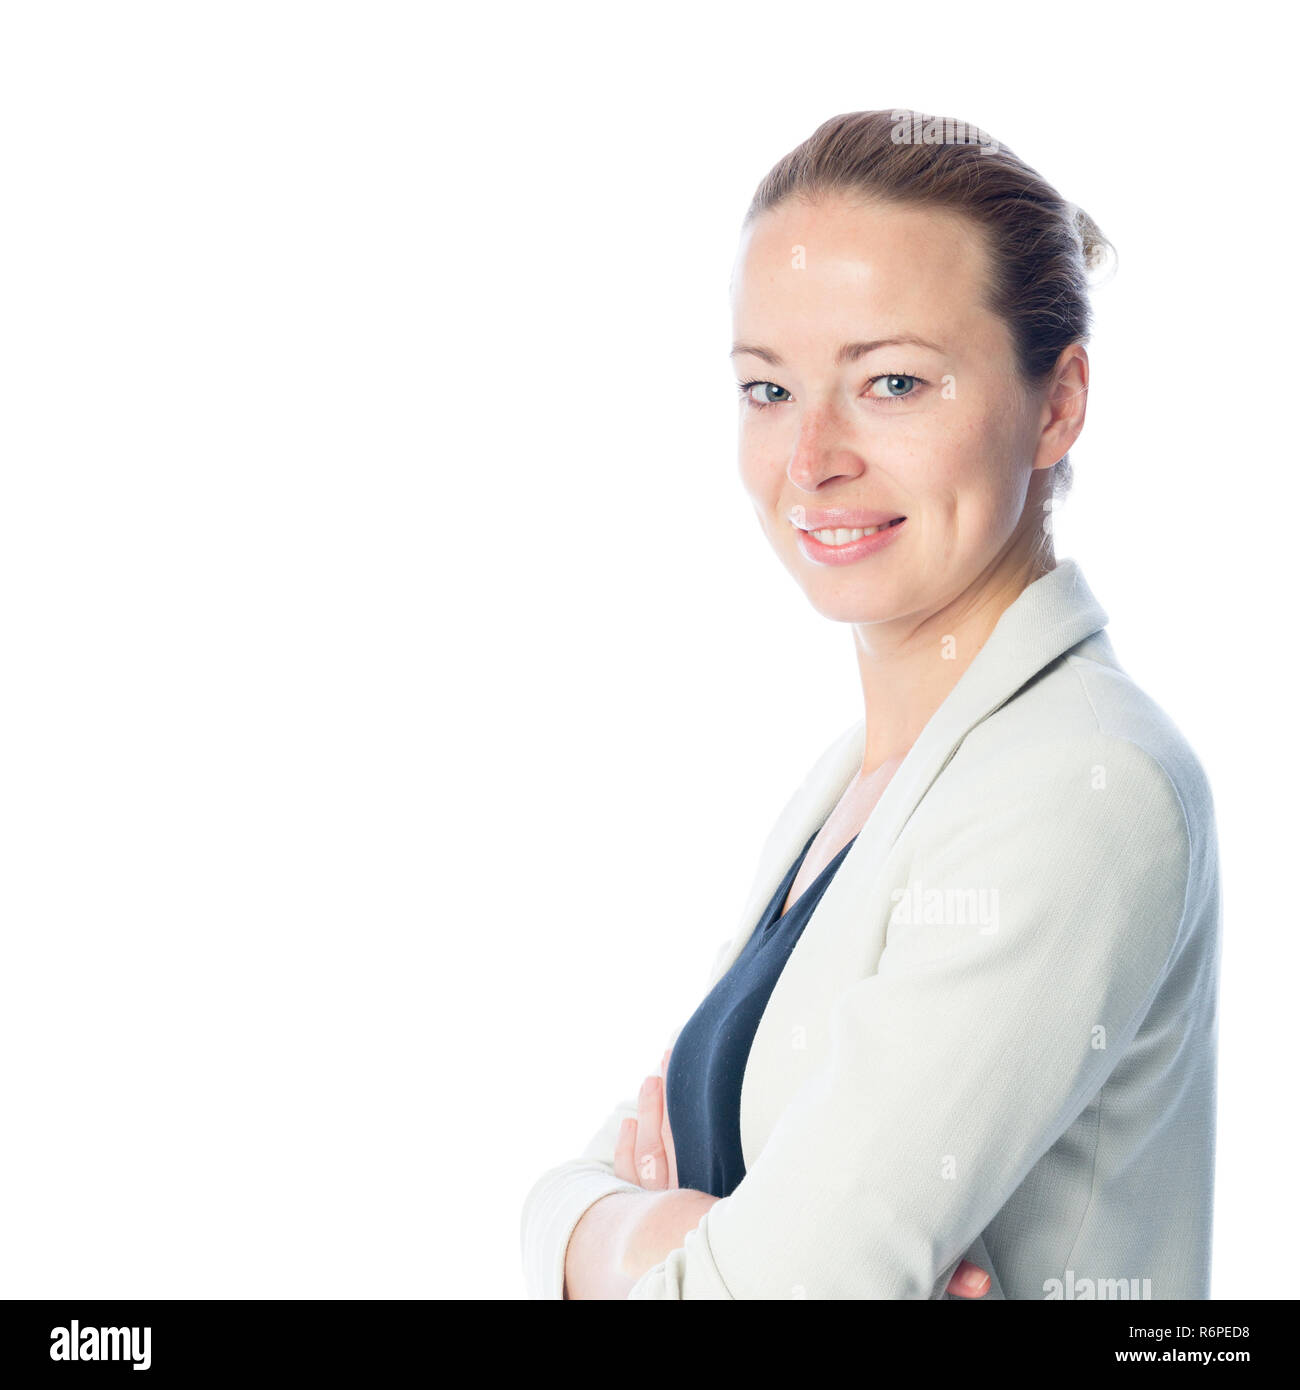 Business woman standing with arms crossed against white background. Stock Photo